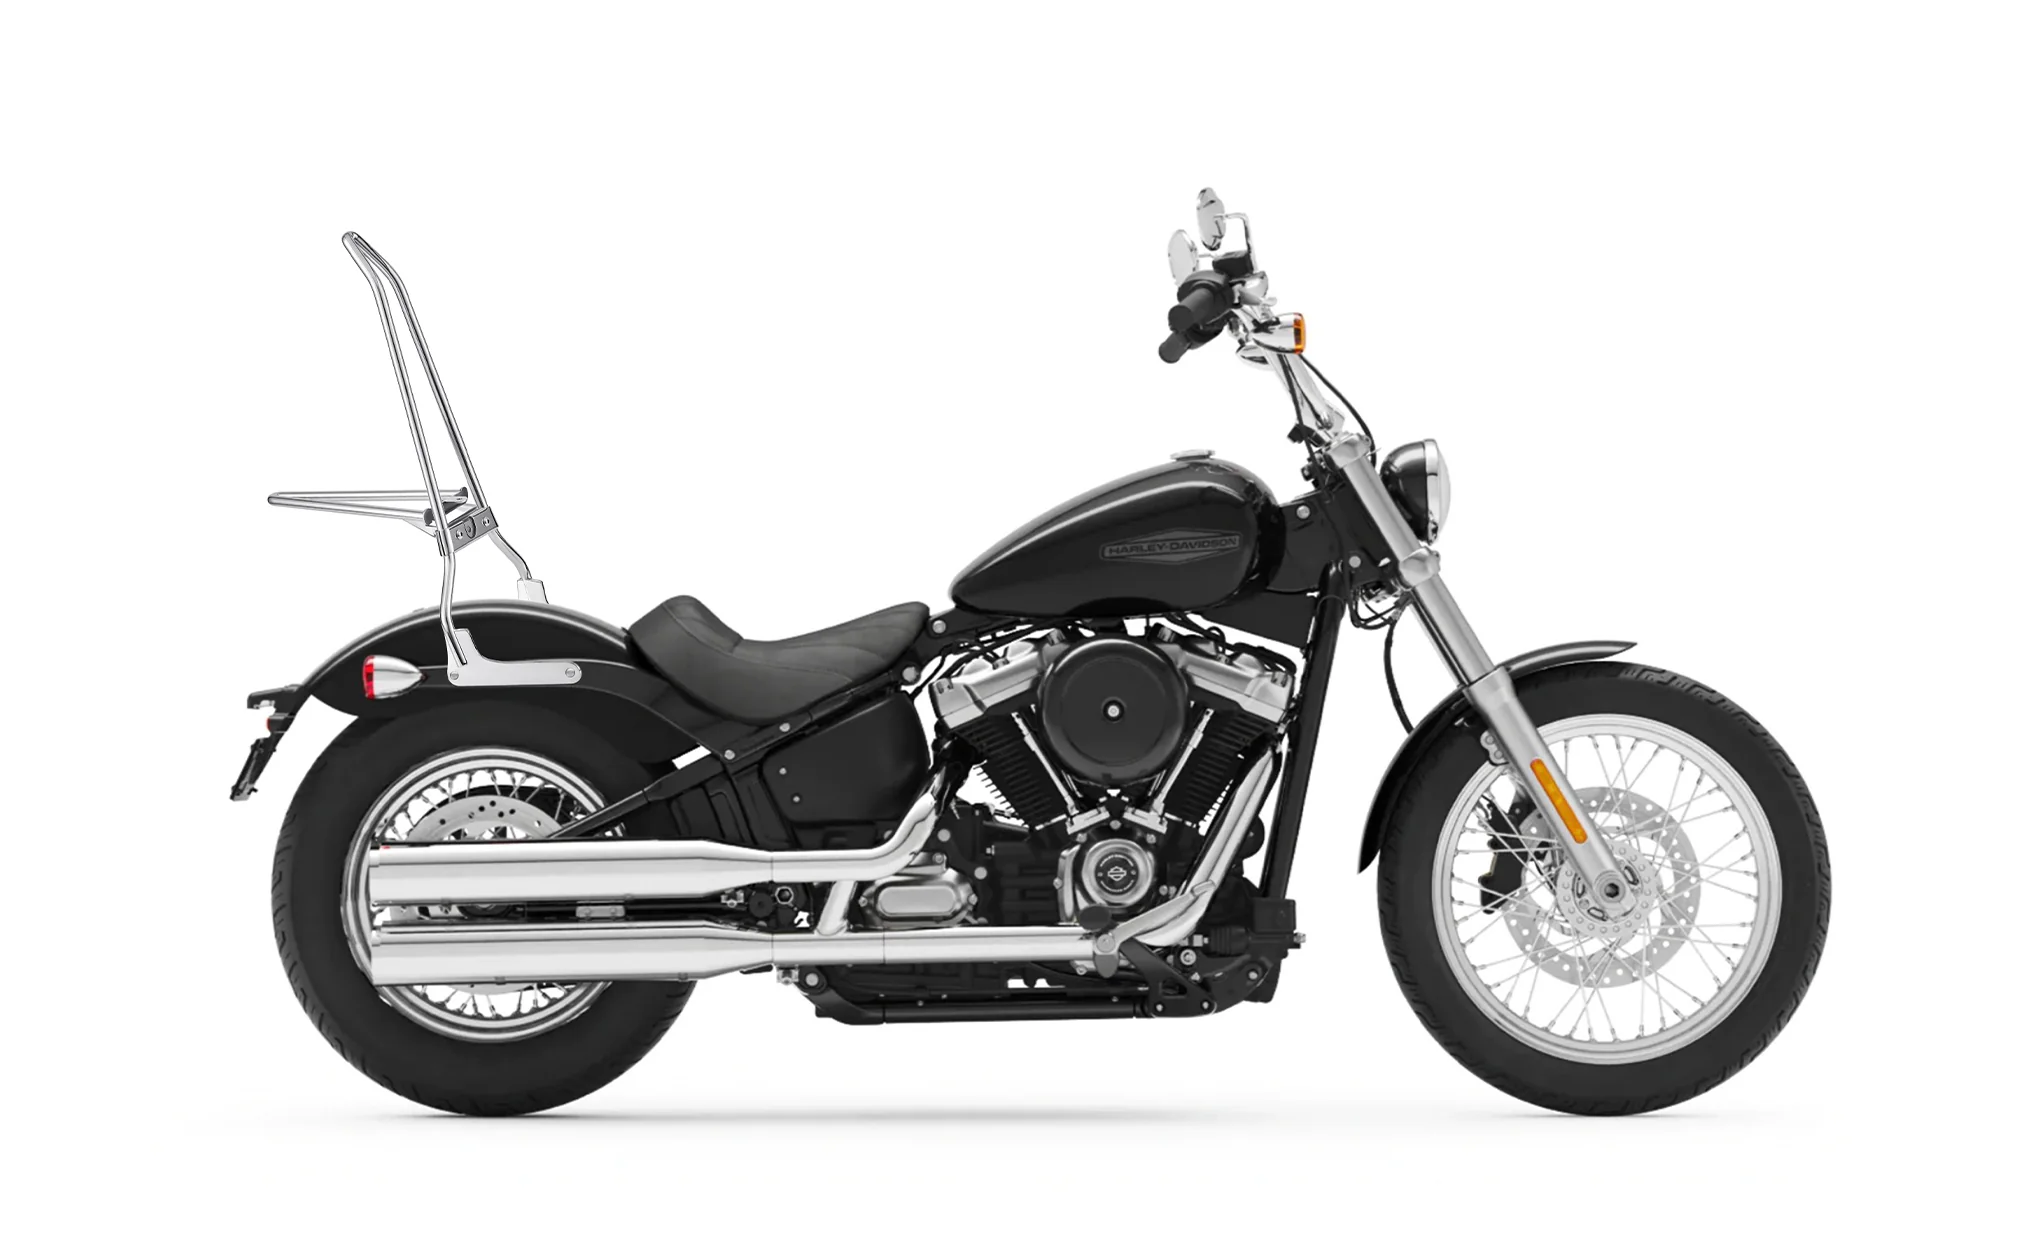 Iron Born Blade 25" Sissy Bar w/ Foldable Luggage Rack for Harley Softail Standard FXST Chrome @expand